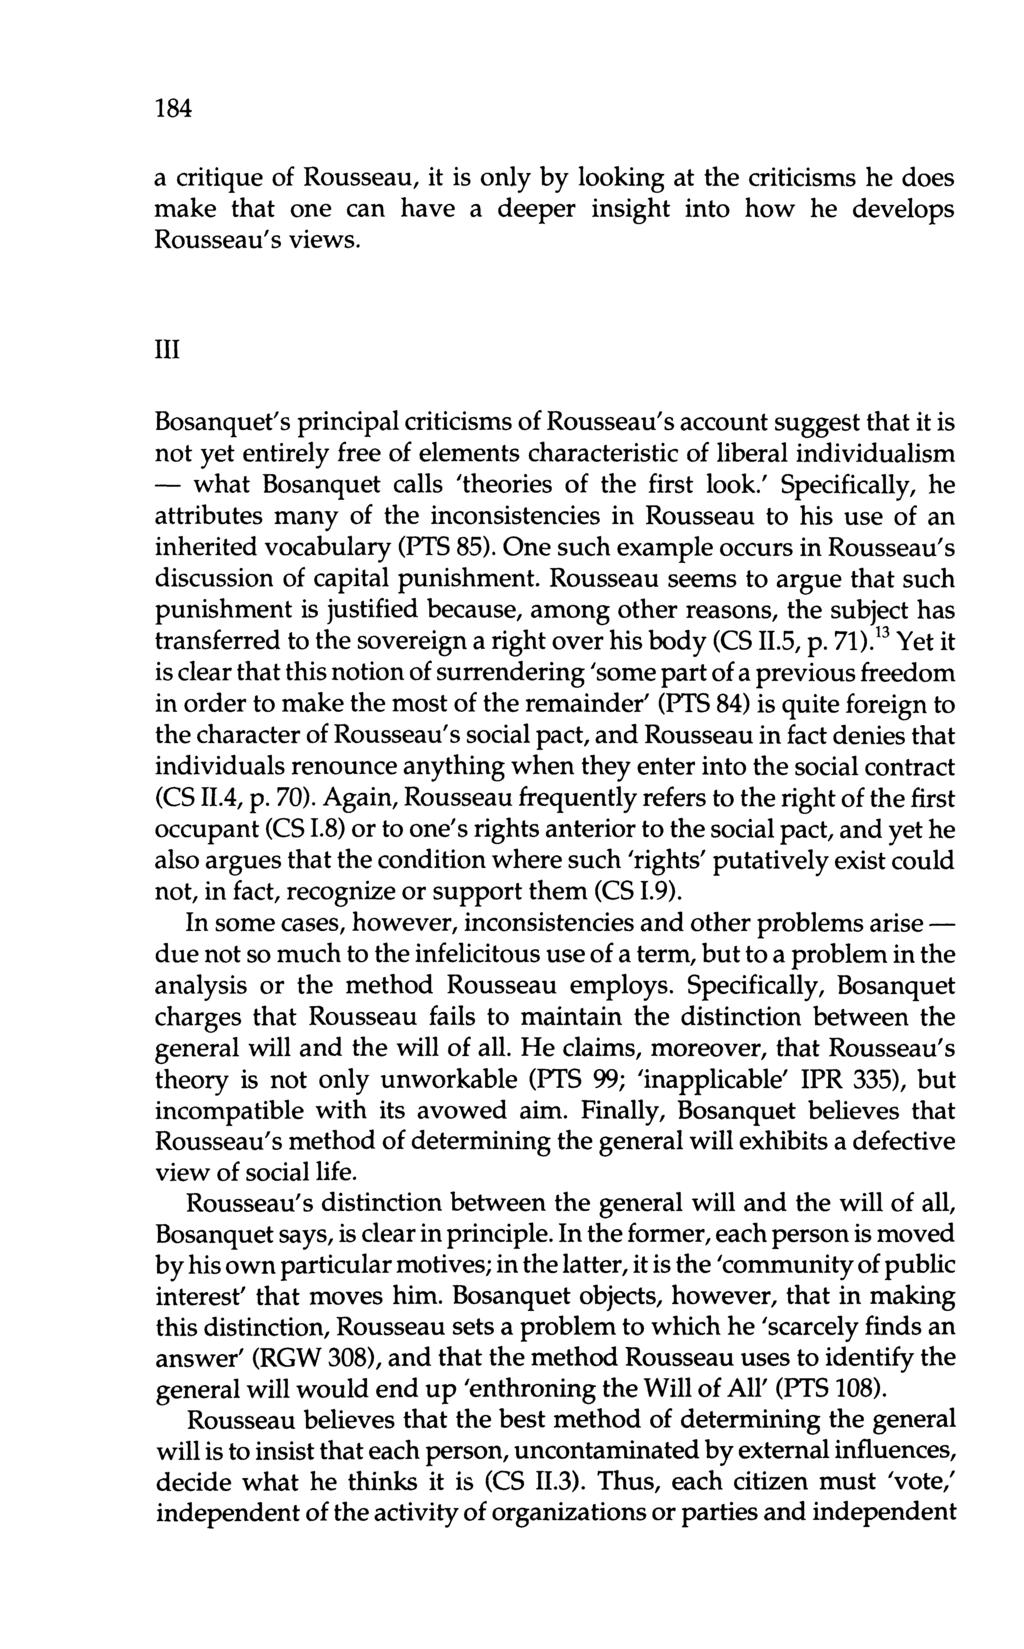 184 a critique of Rousseau, it is only by looking at the criticisms he does make that one can have a deeper insight into how he develops Rousseau's views.